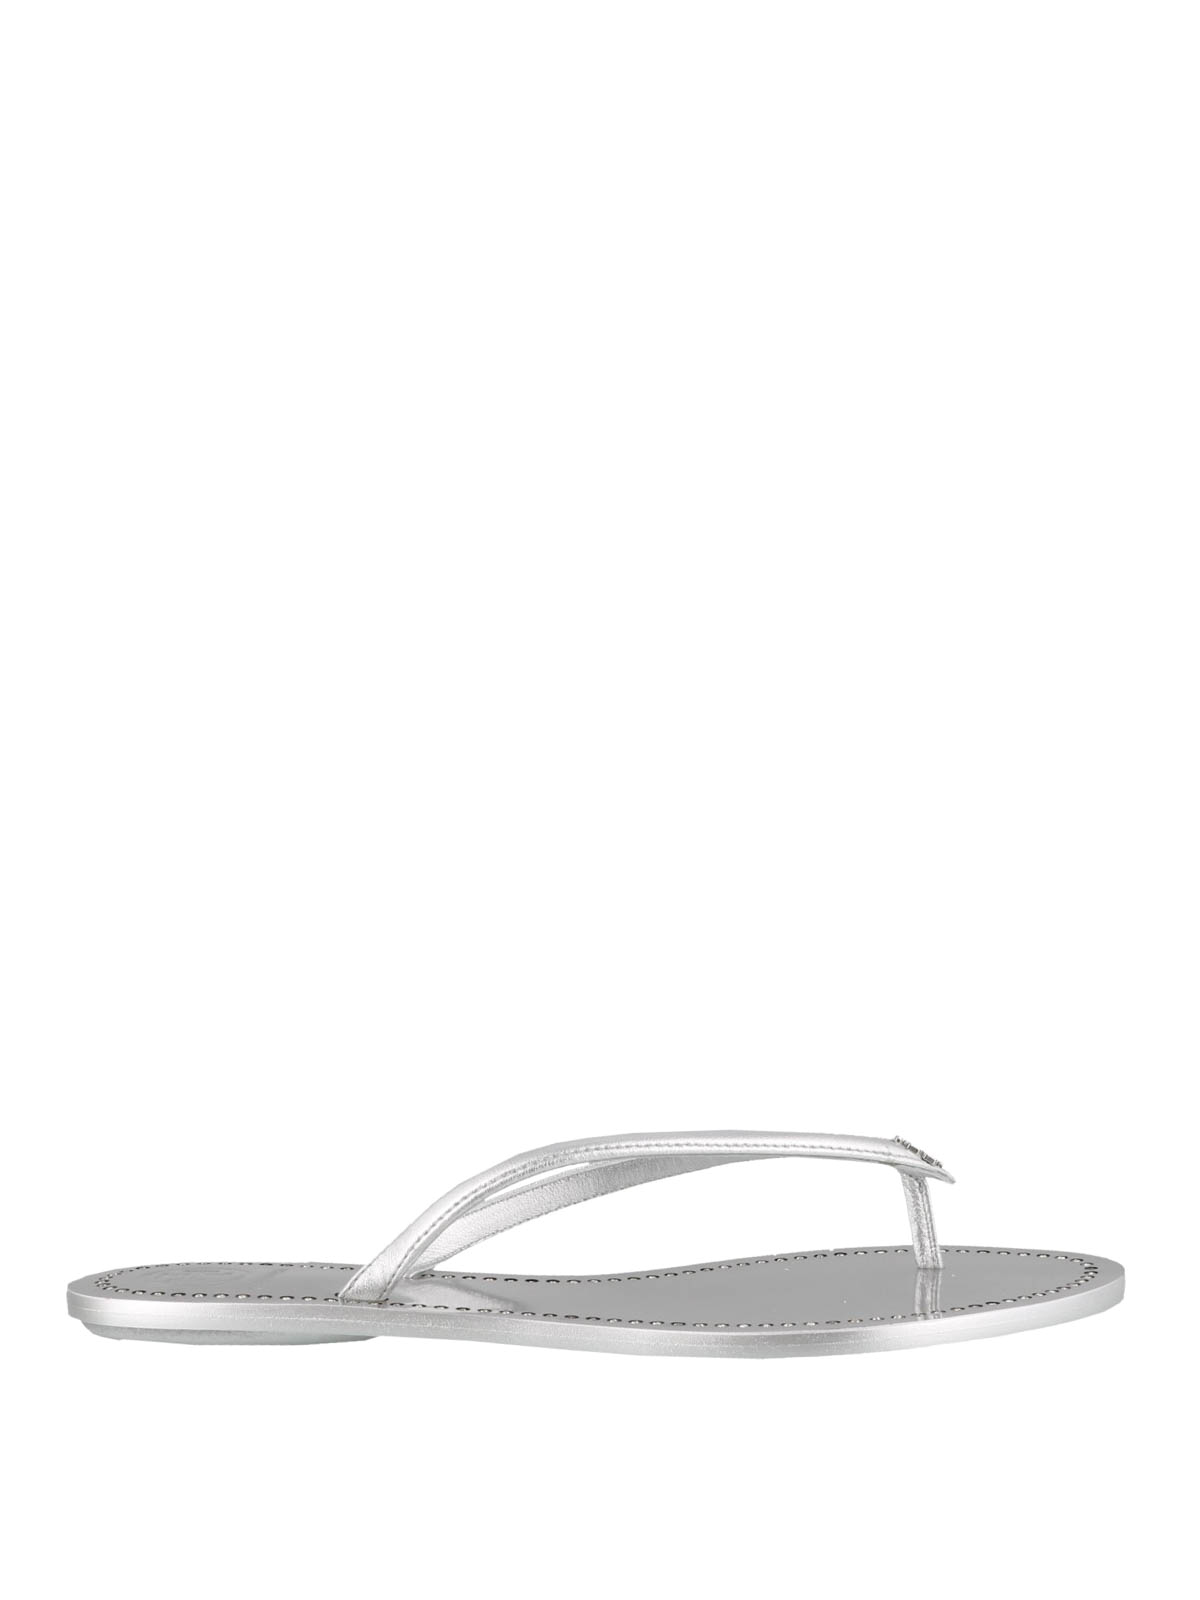 Sandals Tory Burch - Crystal embellished silver thong sandals - 53035040